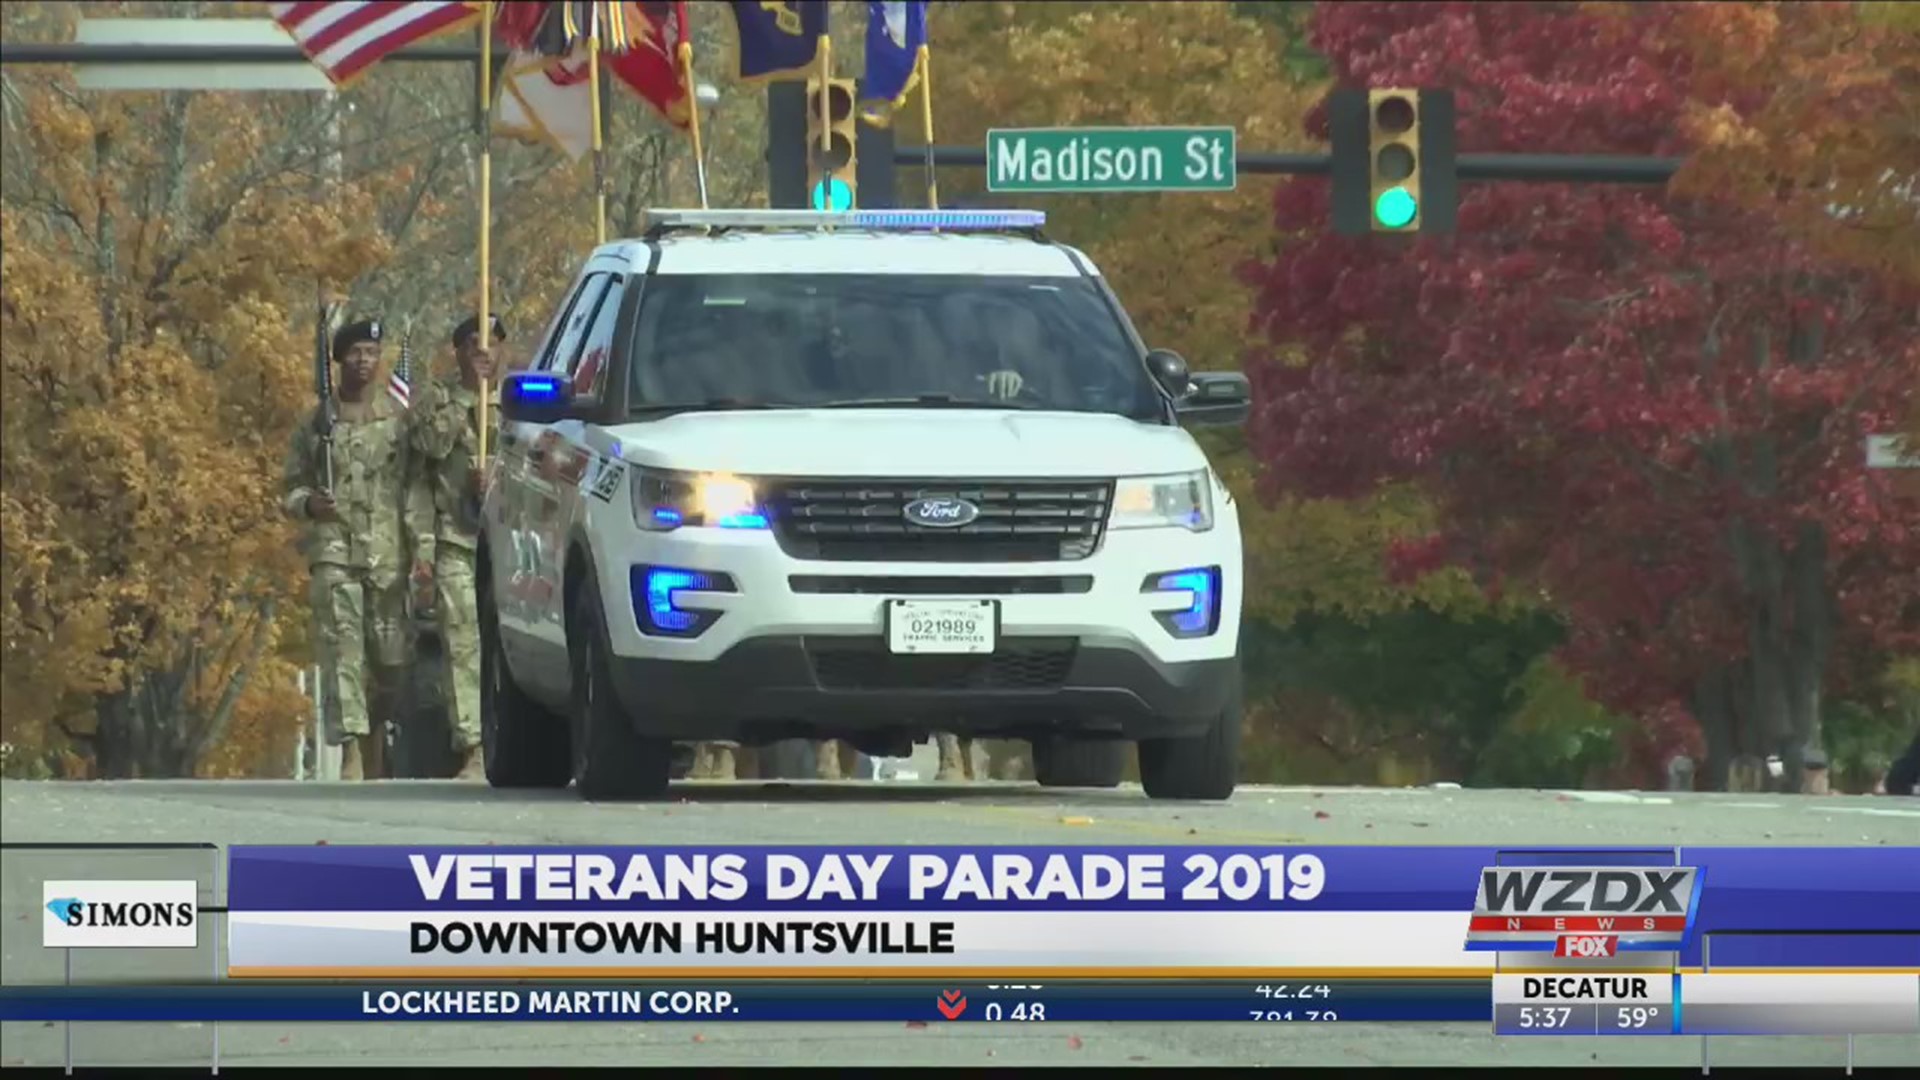 Downtown Huntsville had their annual Veteran's Day Parade Monday afternoon.